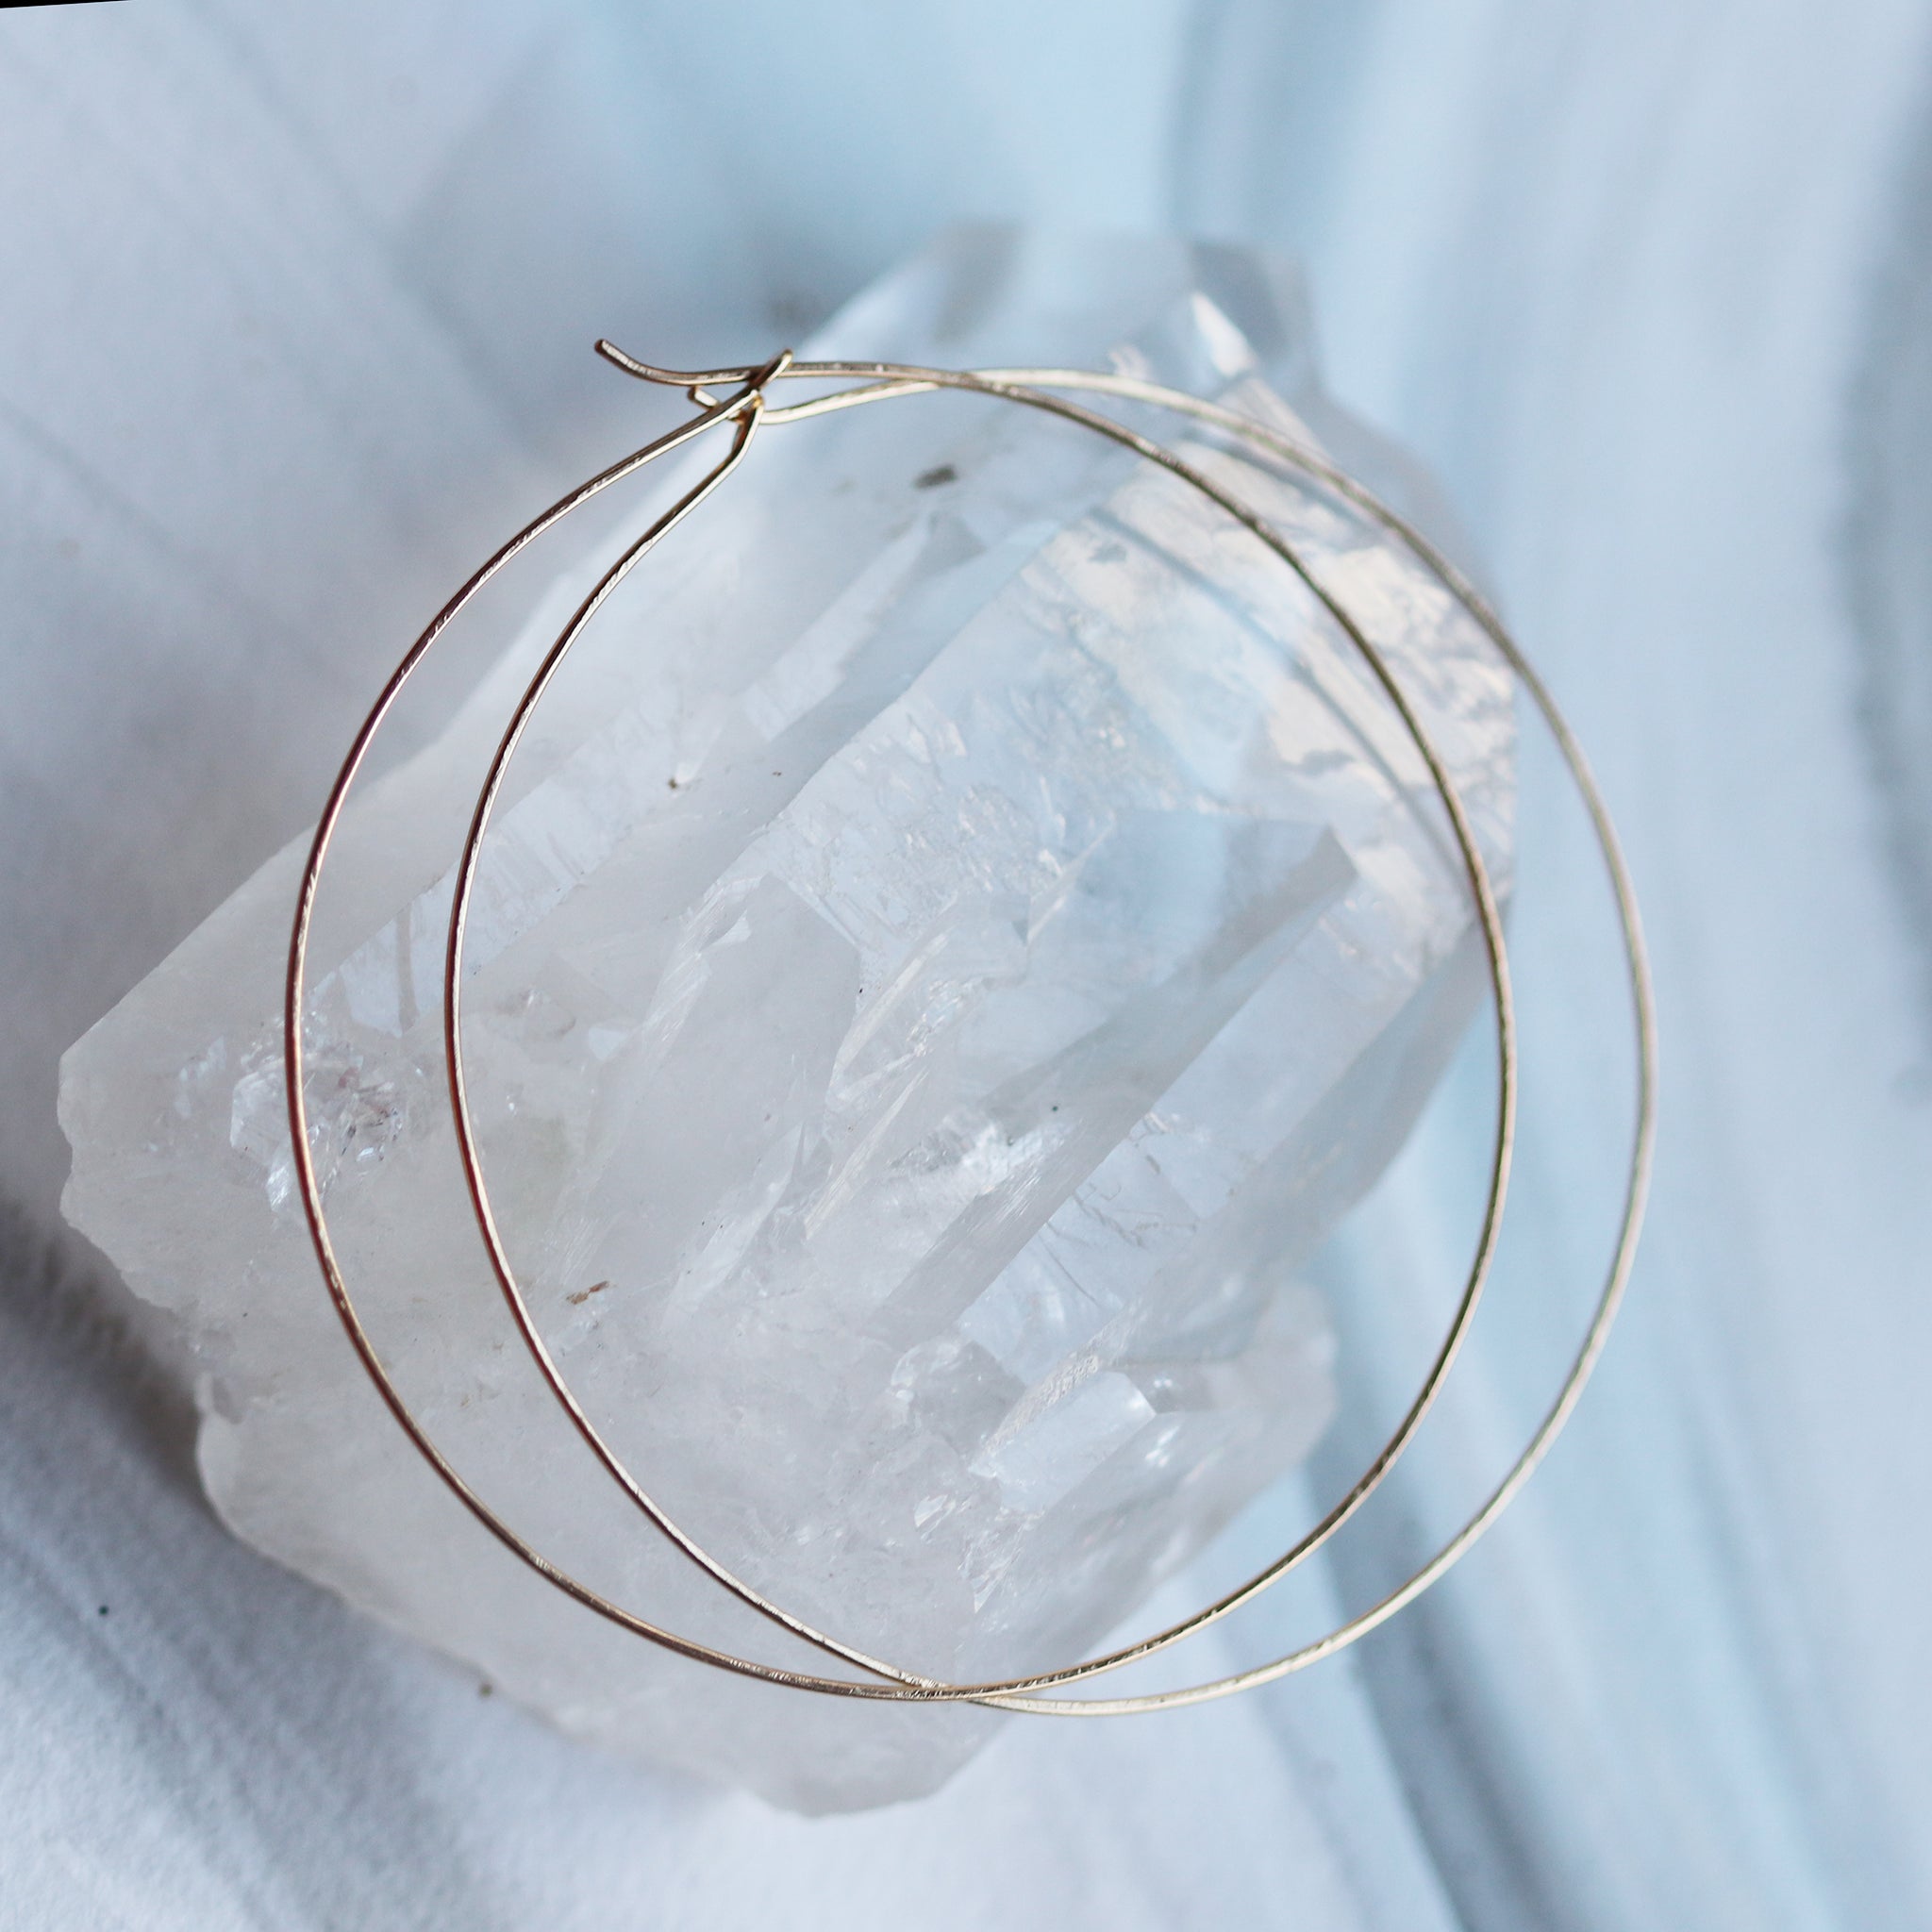 Circle Hammered Hoops Large